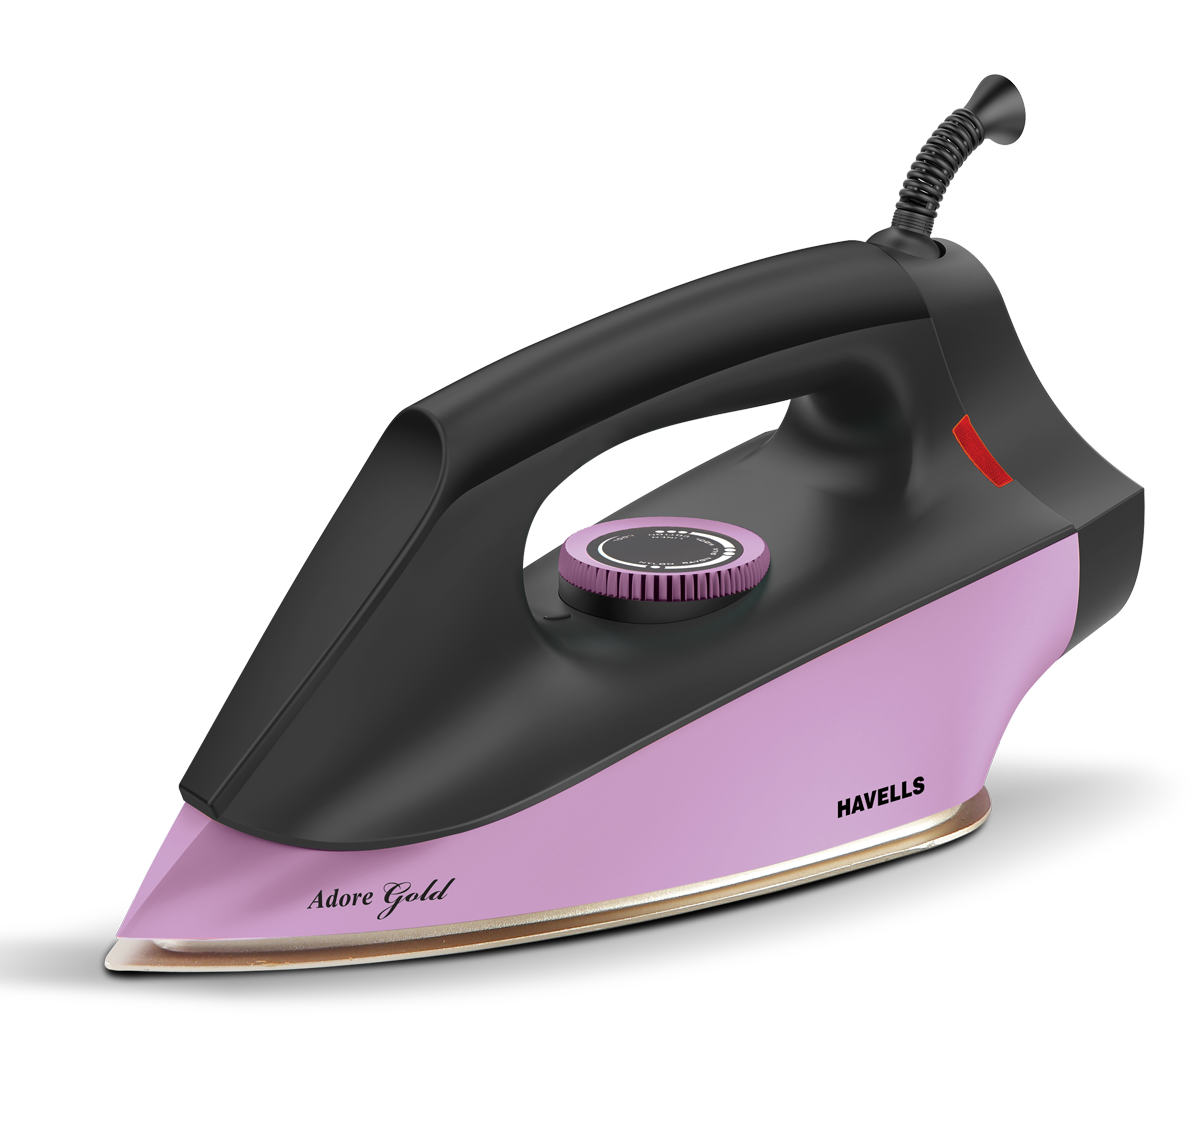 Havells Adore Gold Dry Iron GHGDIBJU110 Pack of 3